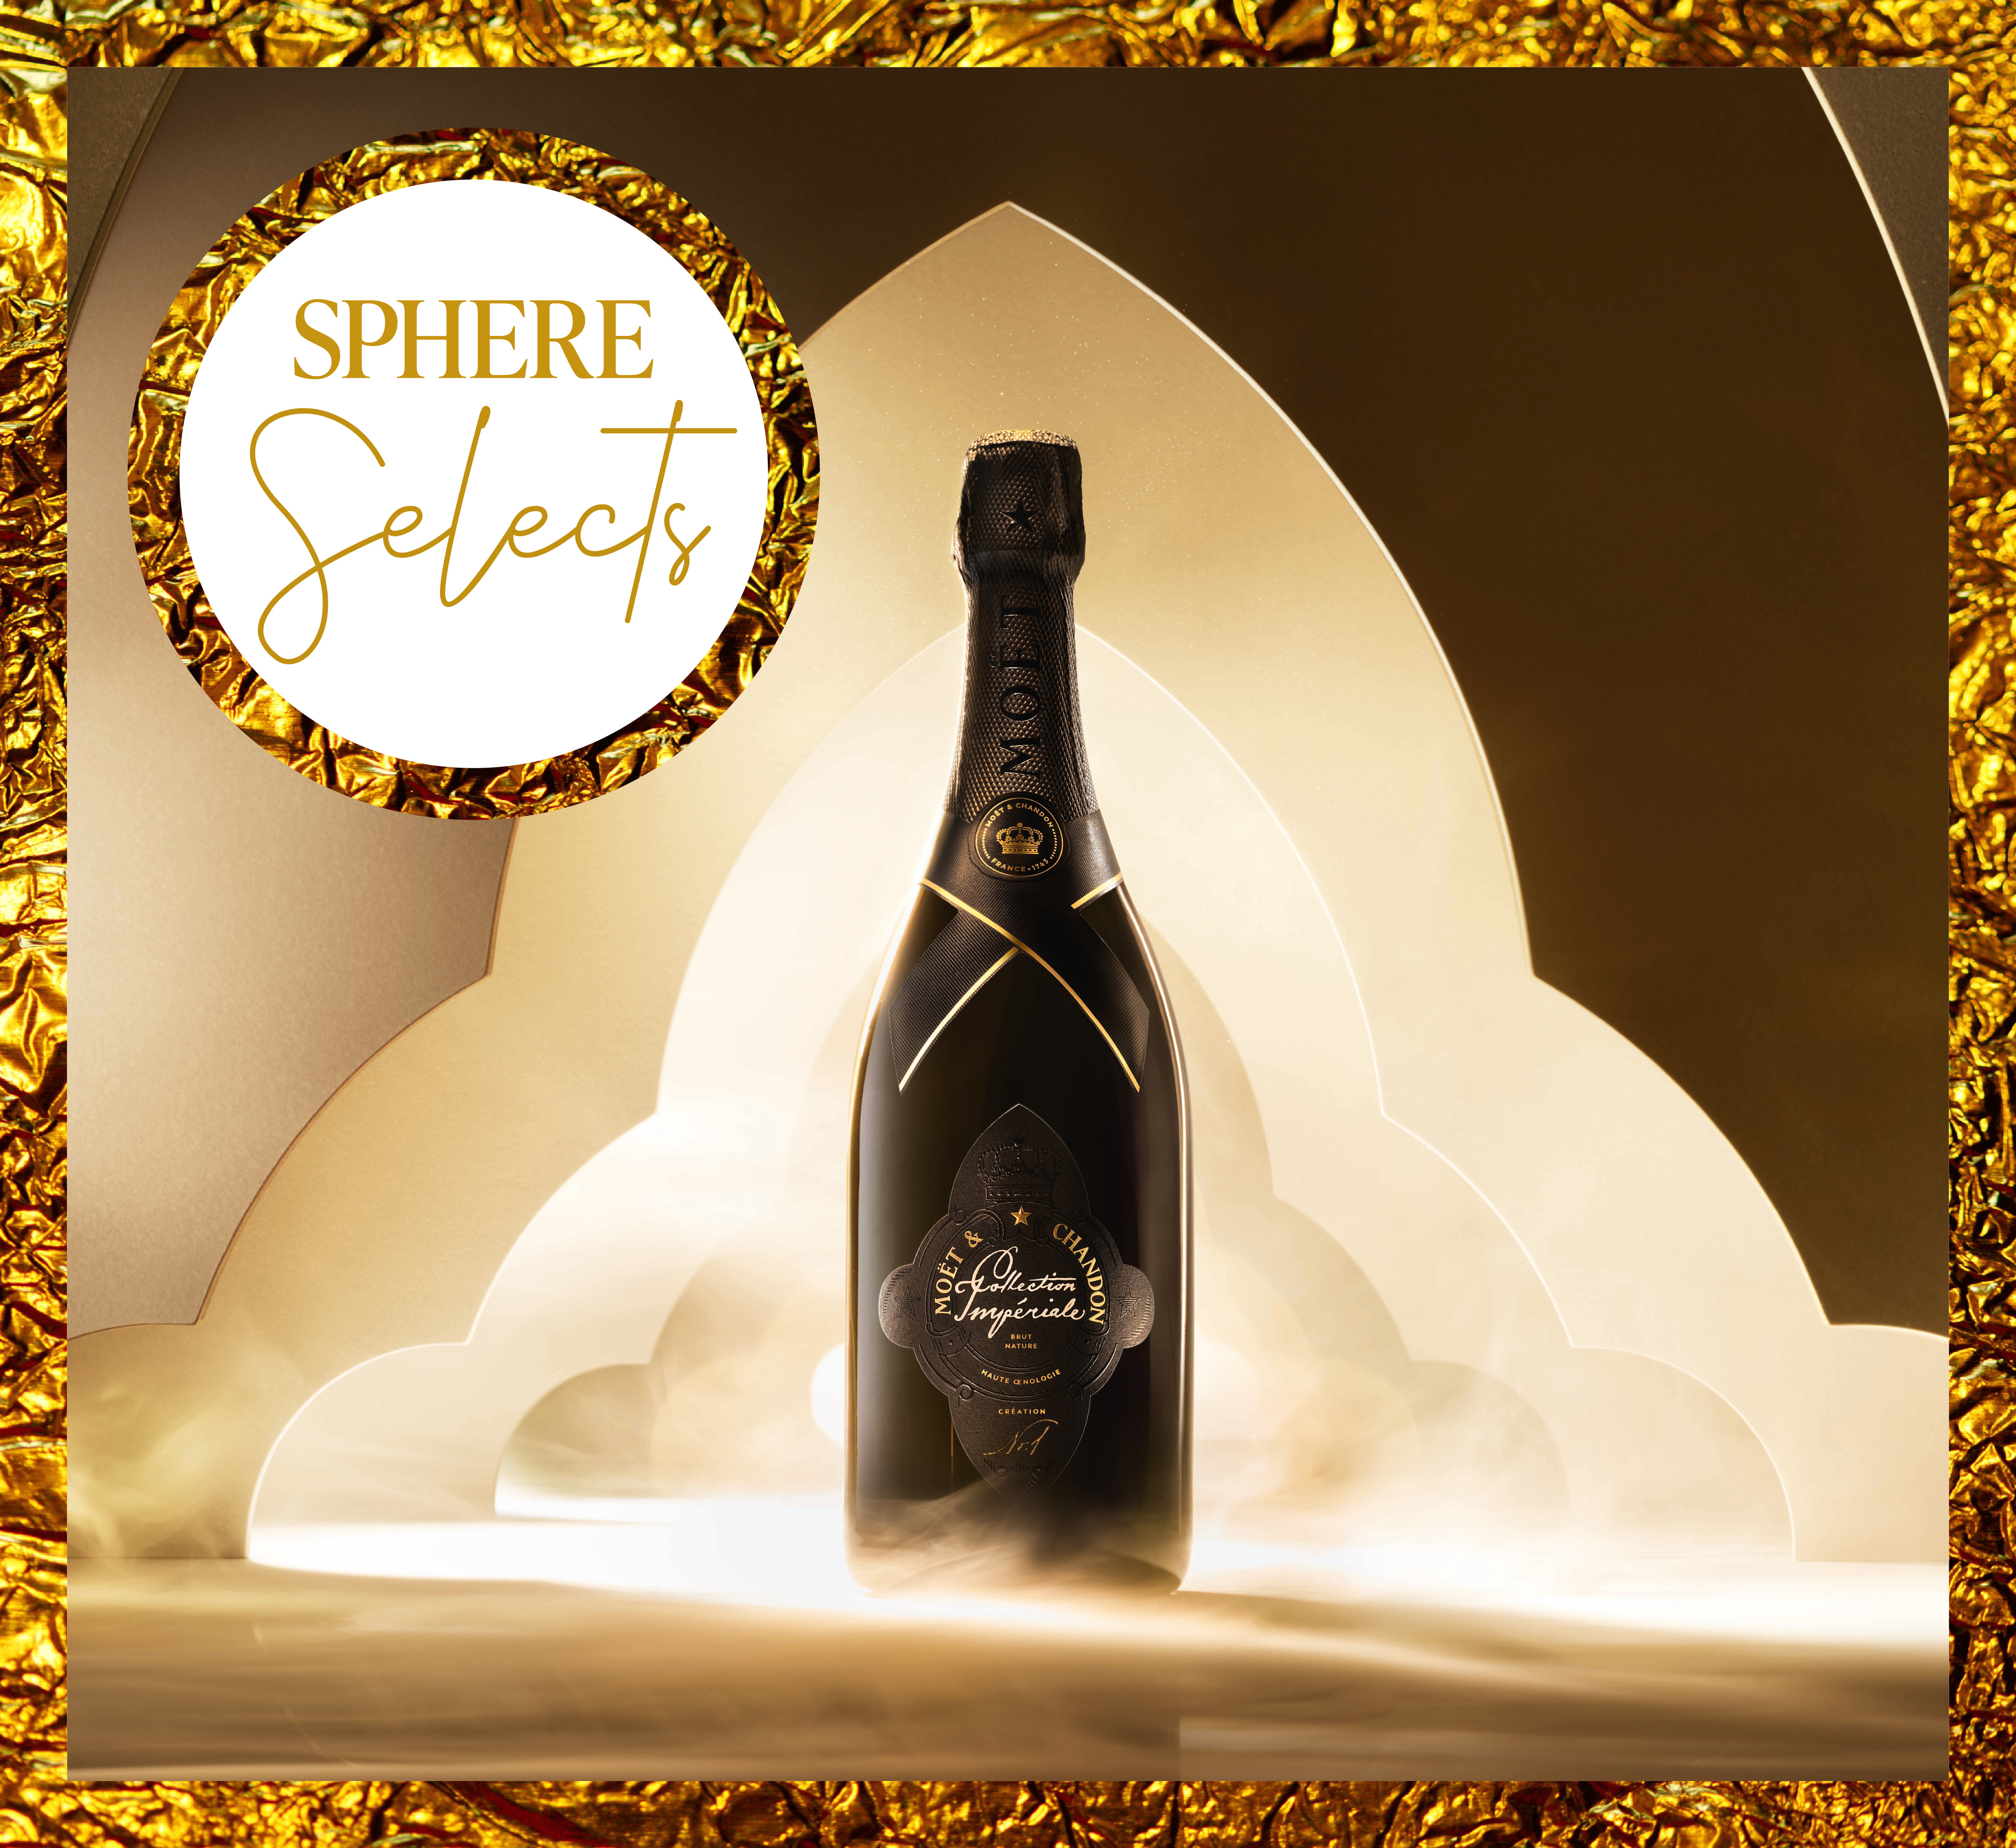 SPHERE's Christmas Gift Guide Part Two - Moët & Chandon